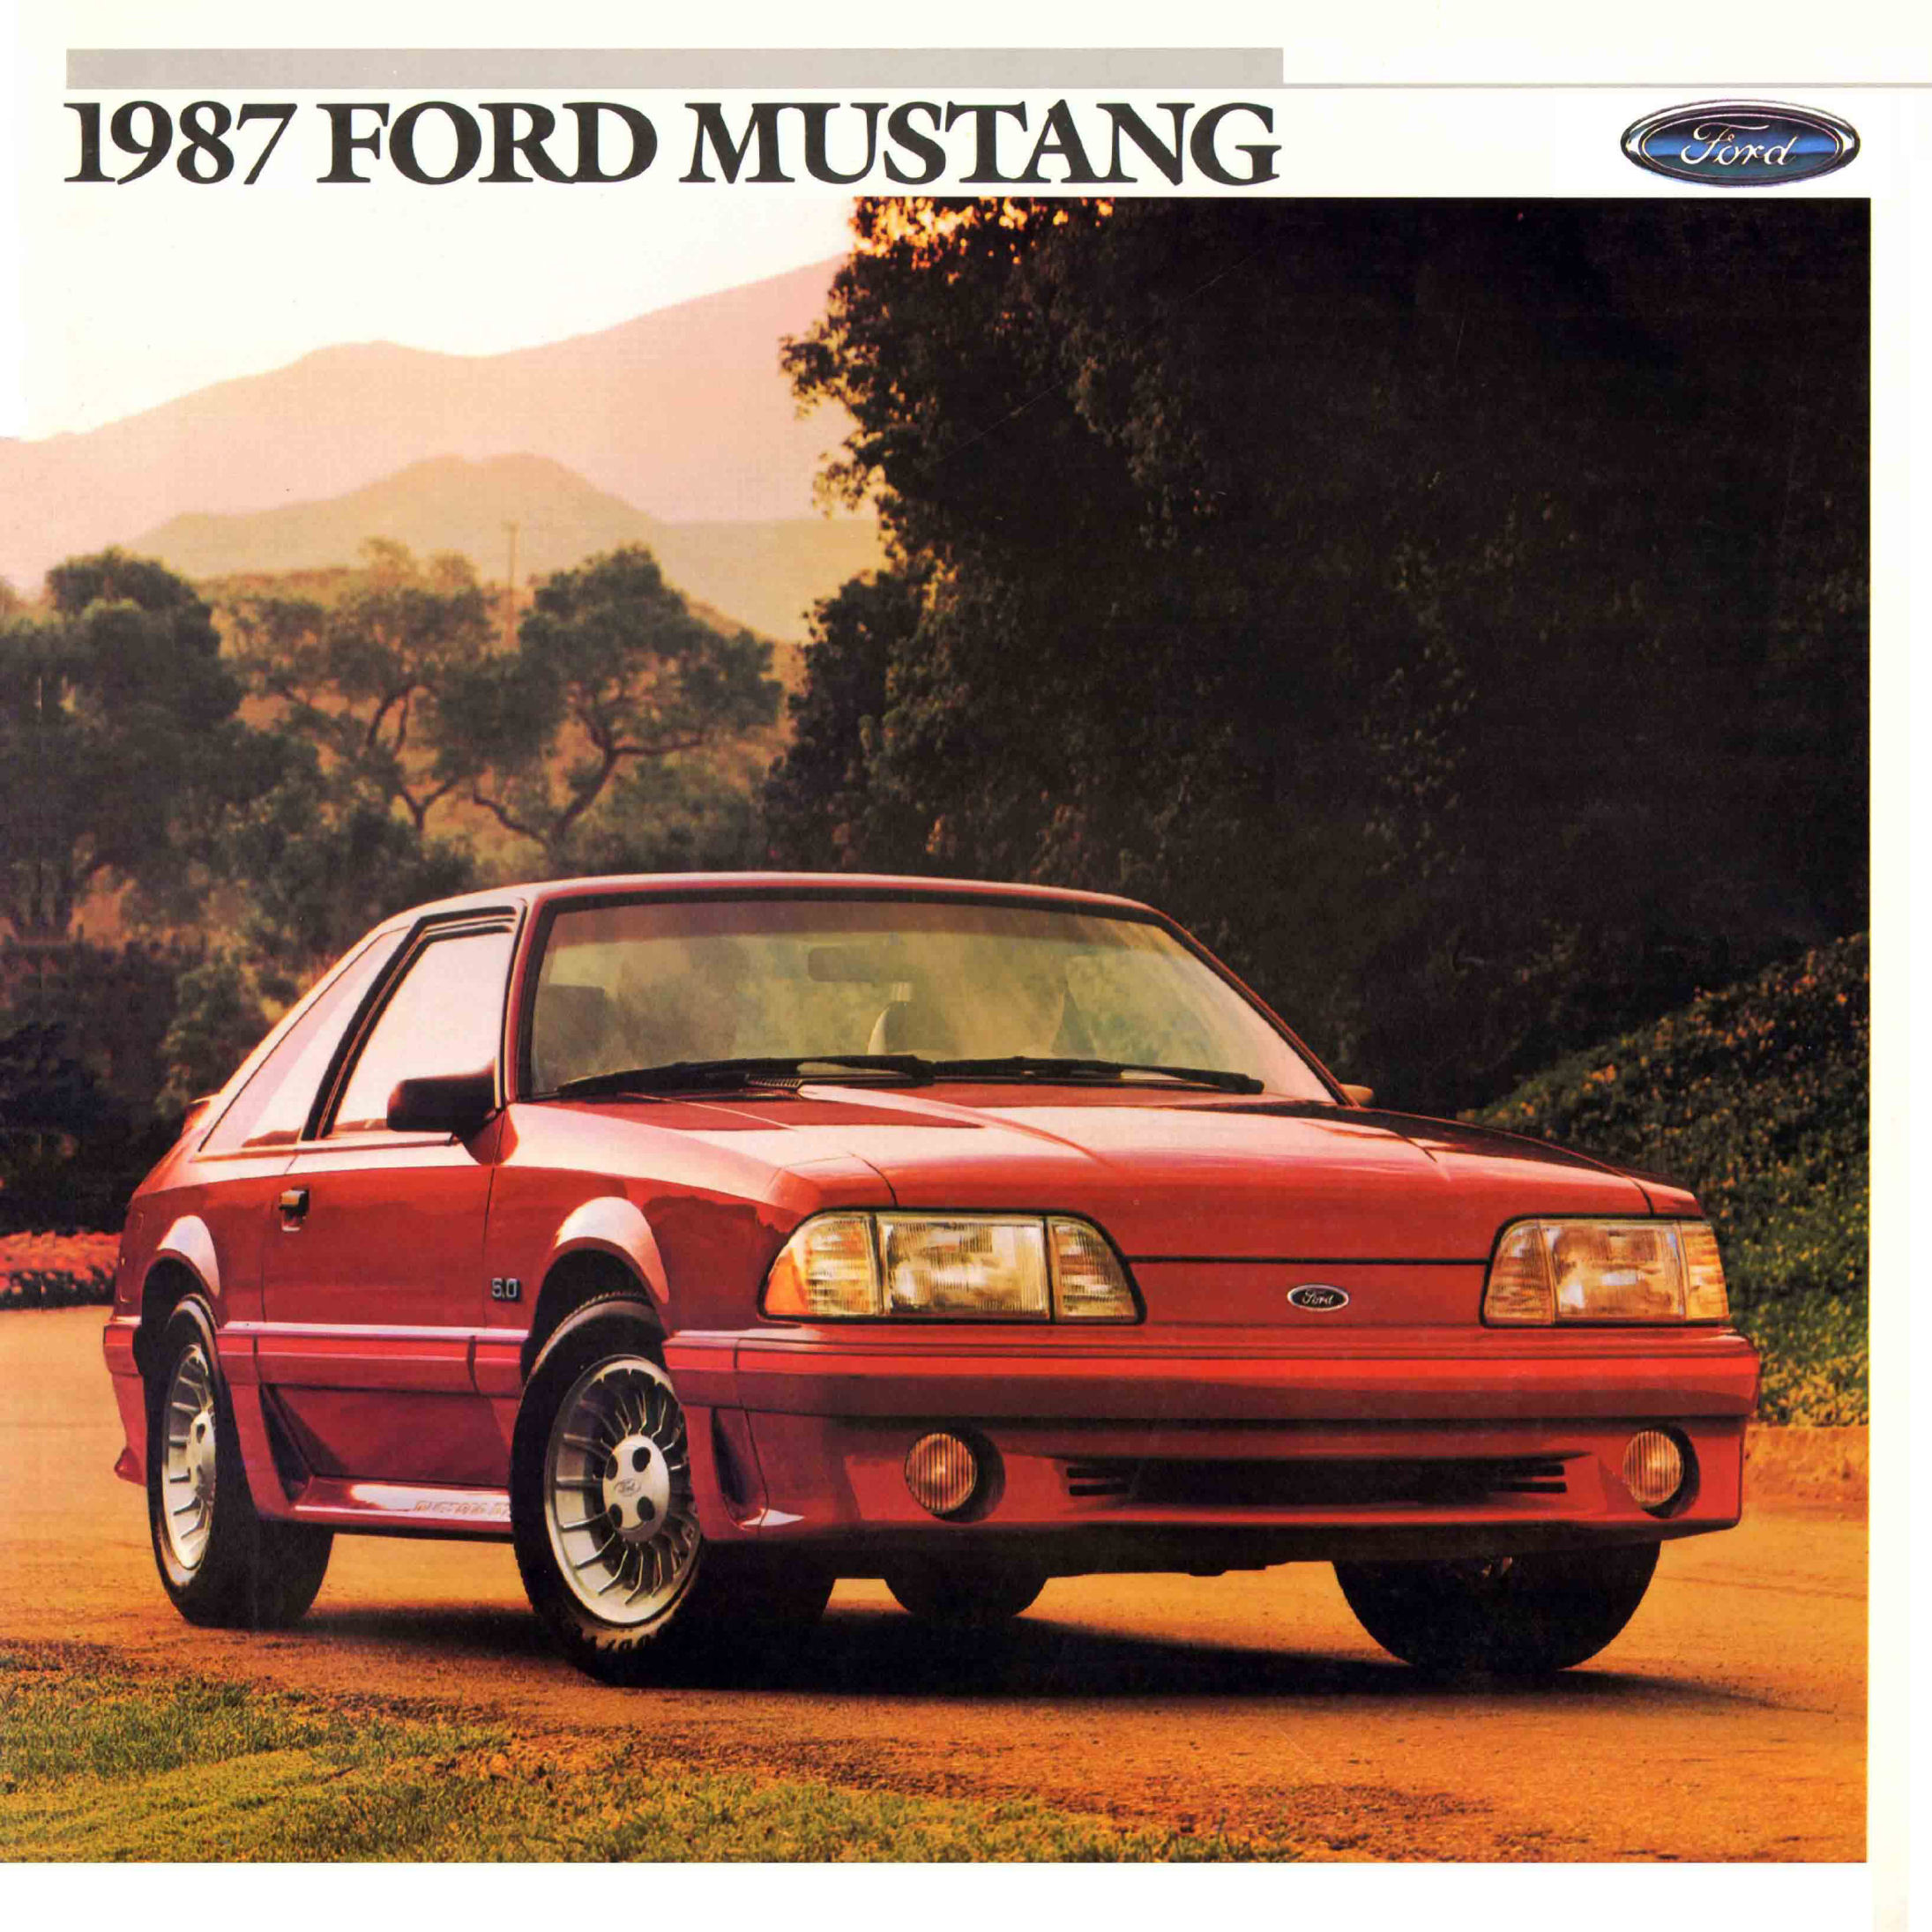 1987_Ford_Mustang-01